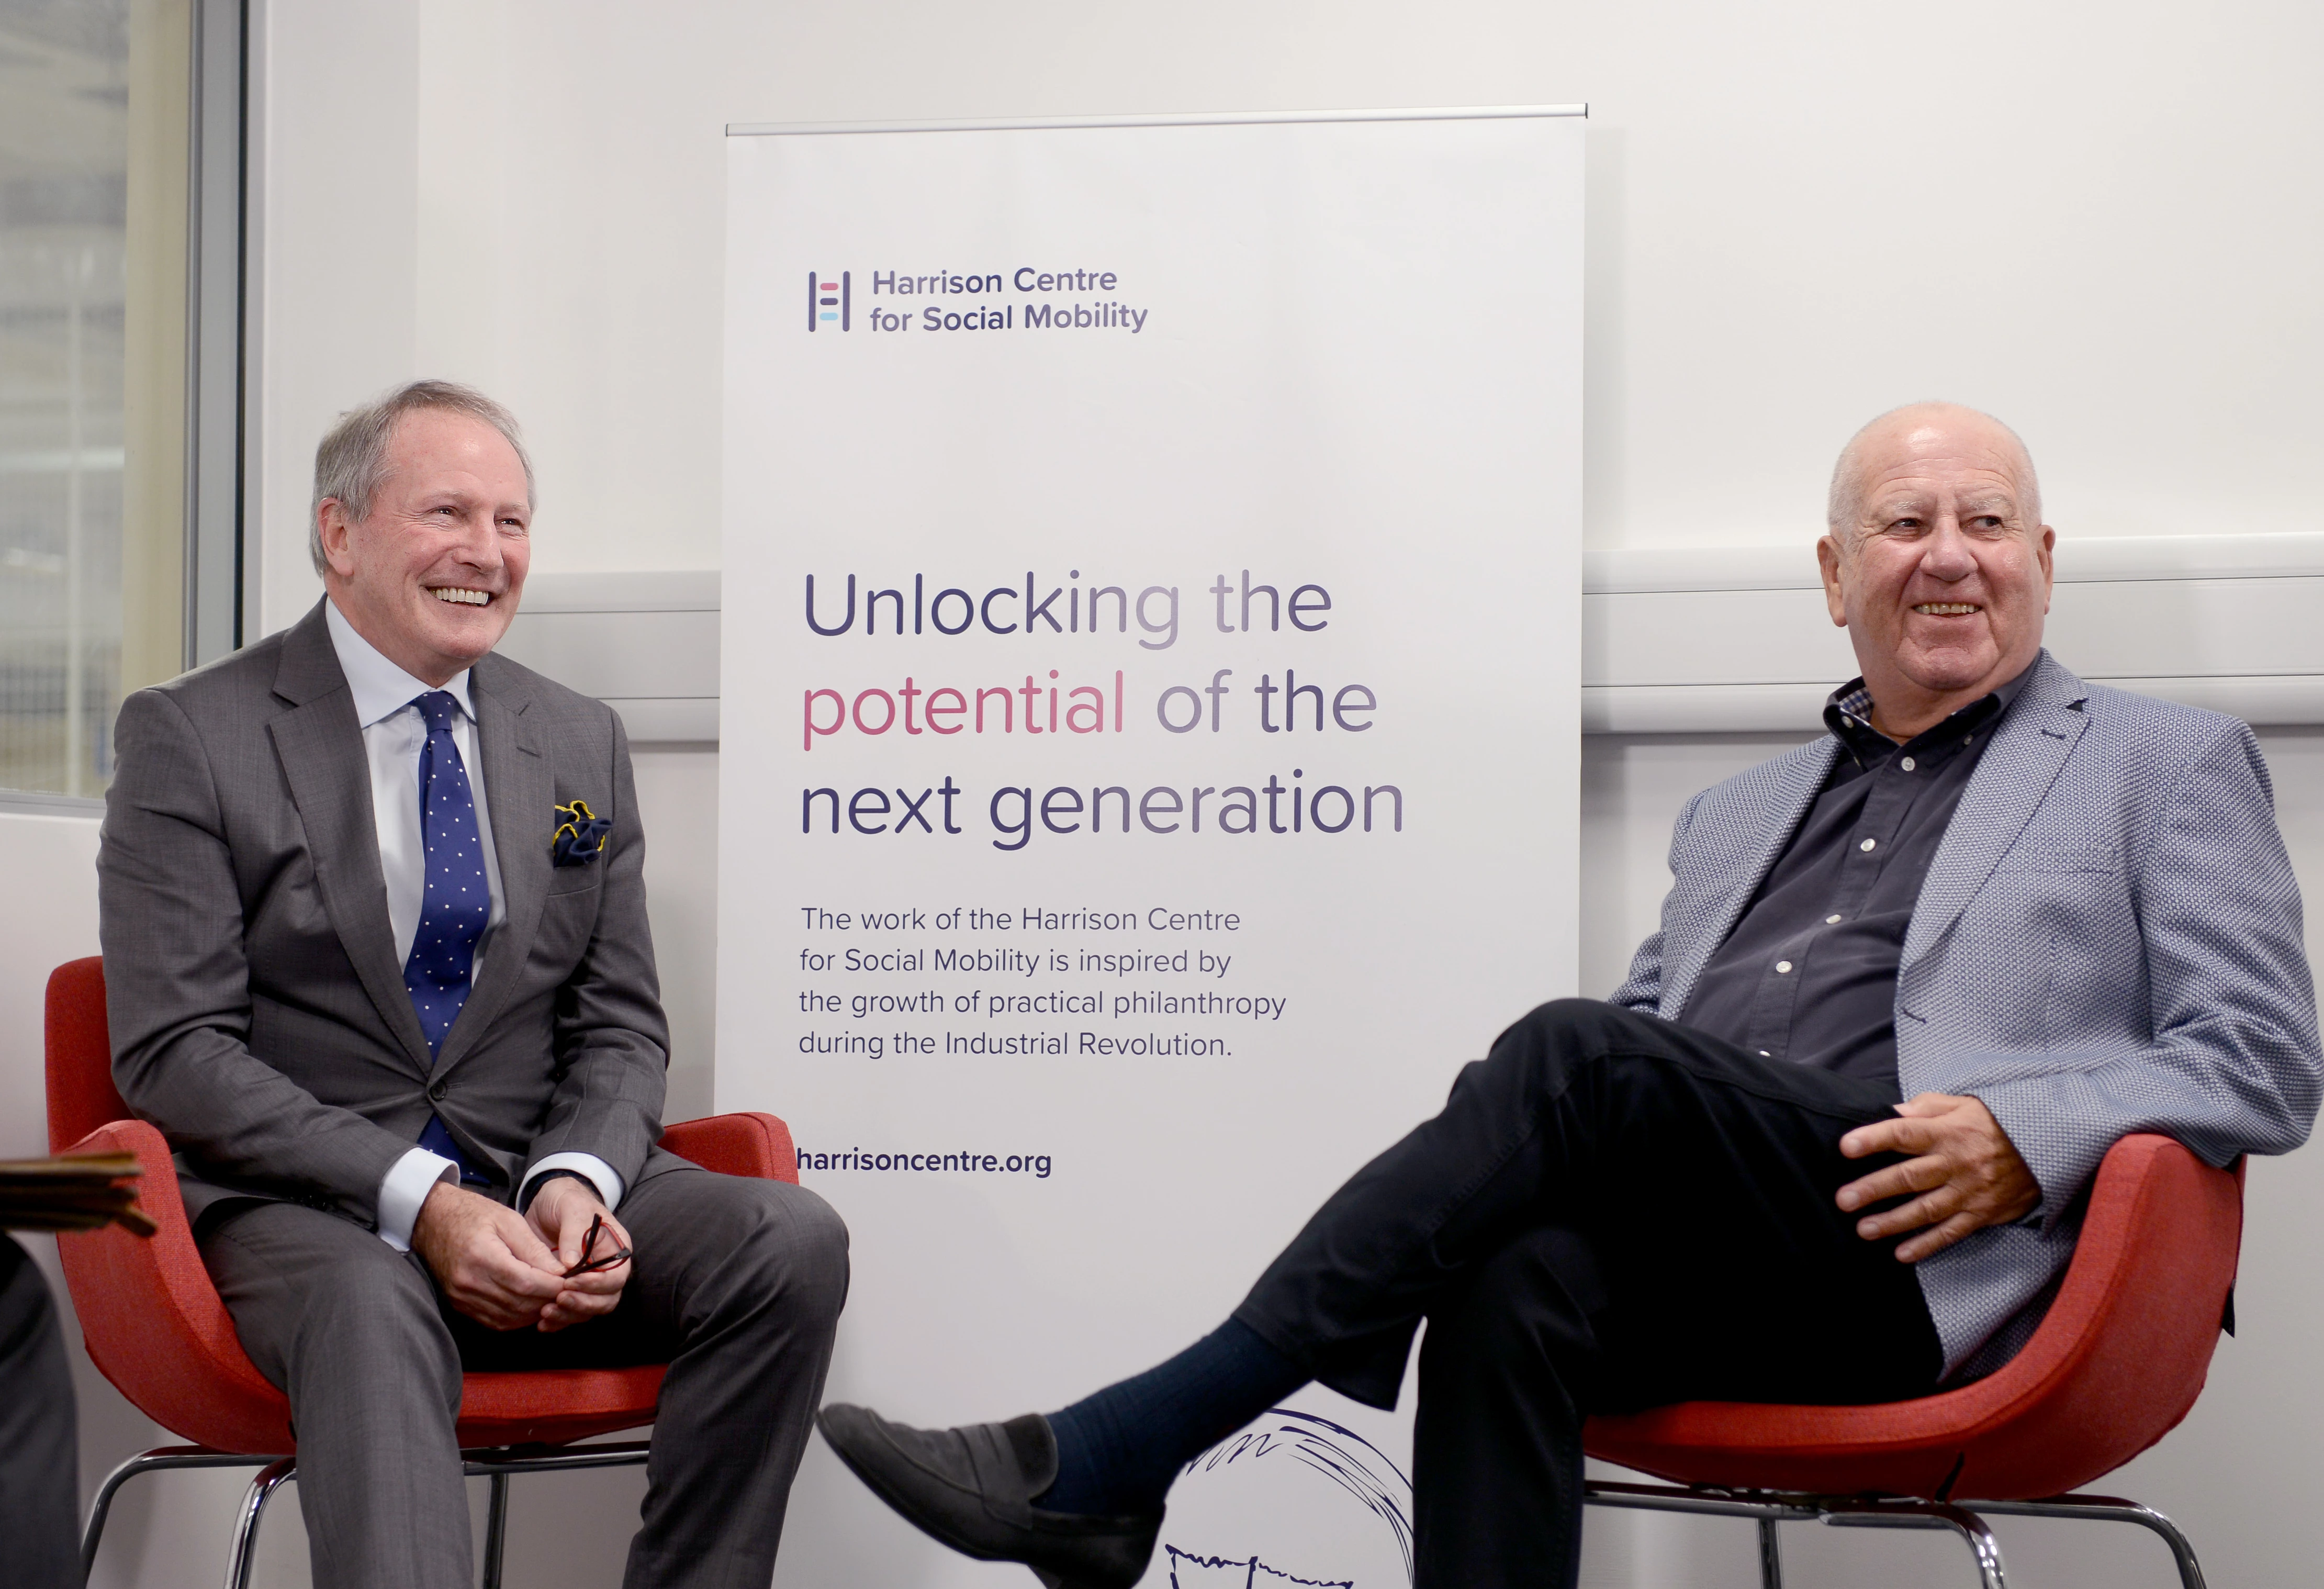 Founder of the Harrison Centre for Social Mobility, David Harrison, meets with Sir Bob Murray CBE, chairman of the Foundation of Light in the Beacon.